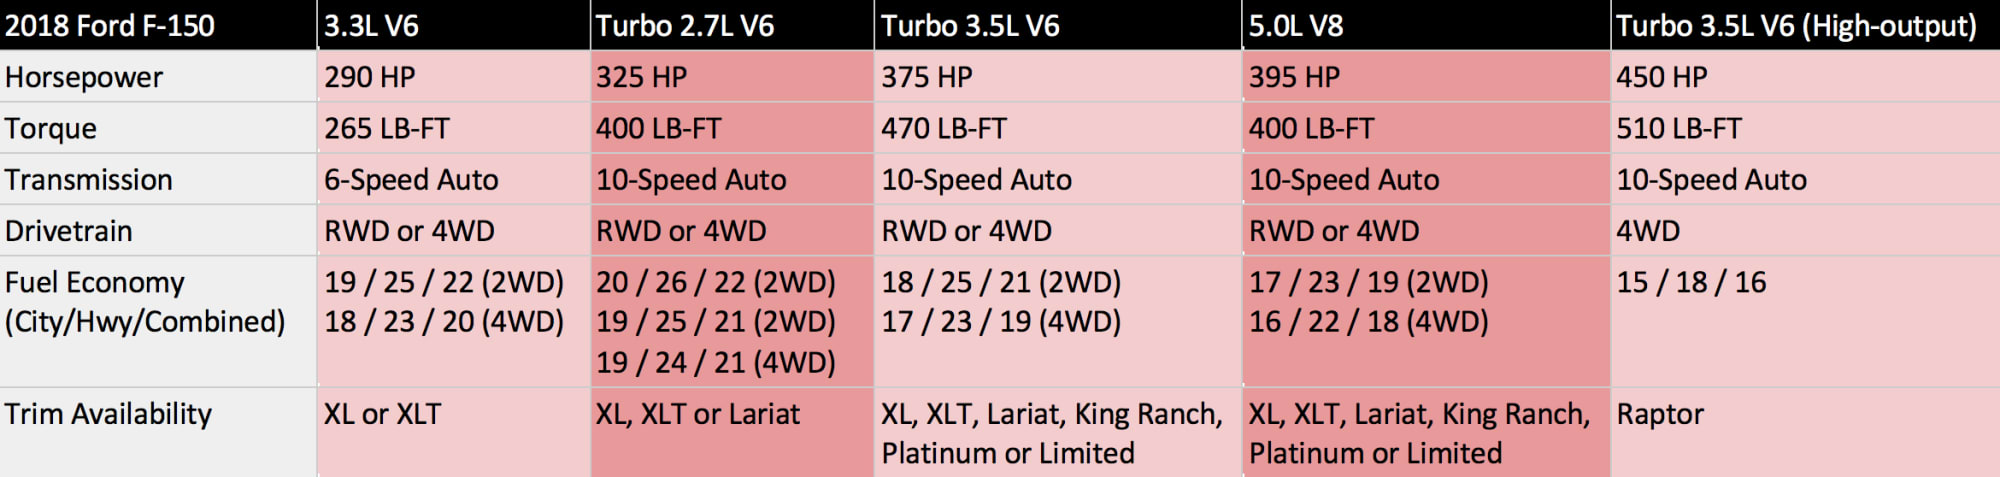 2018 Ford F-150 engine and trim chart